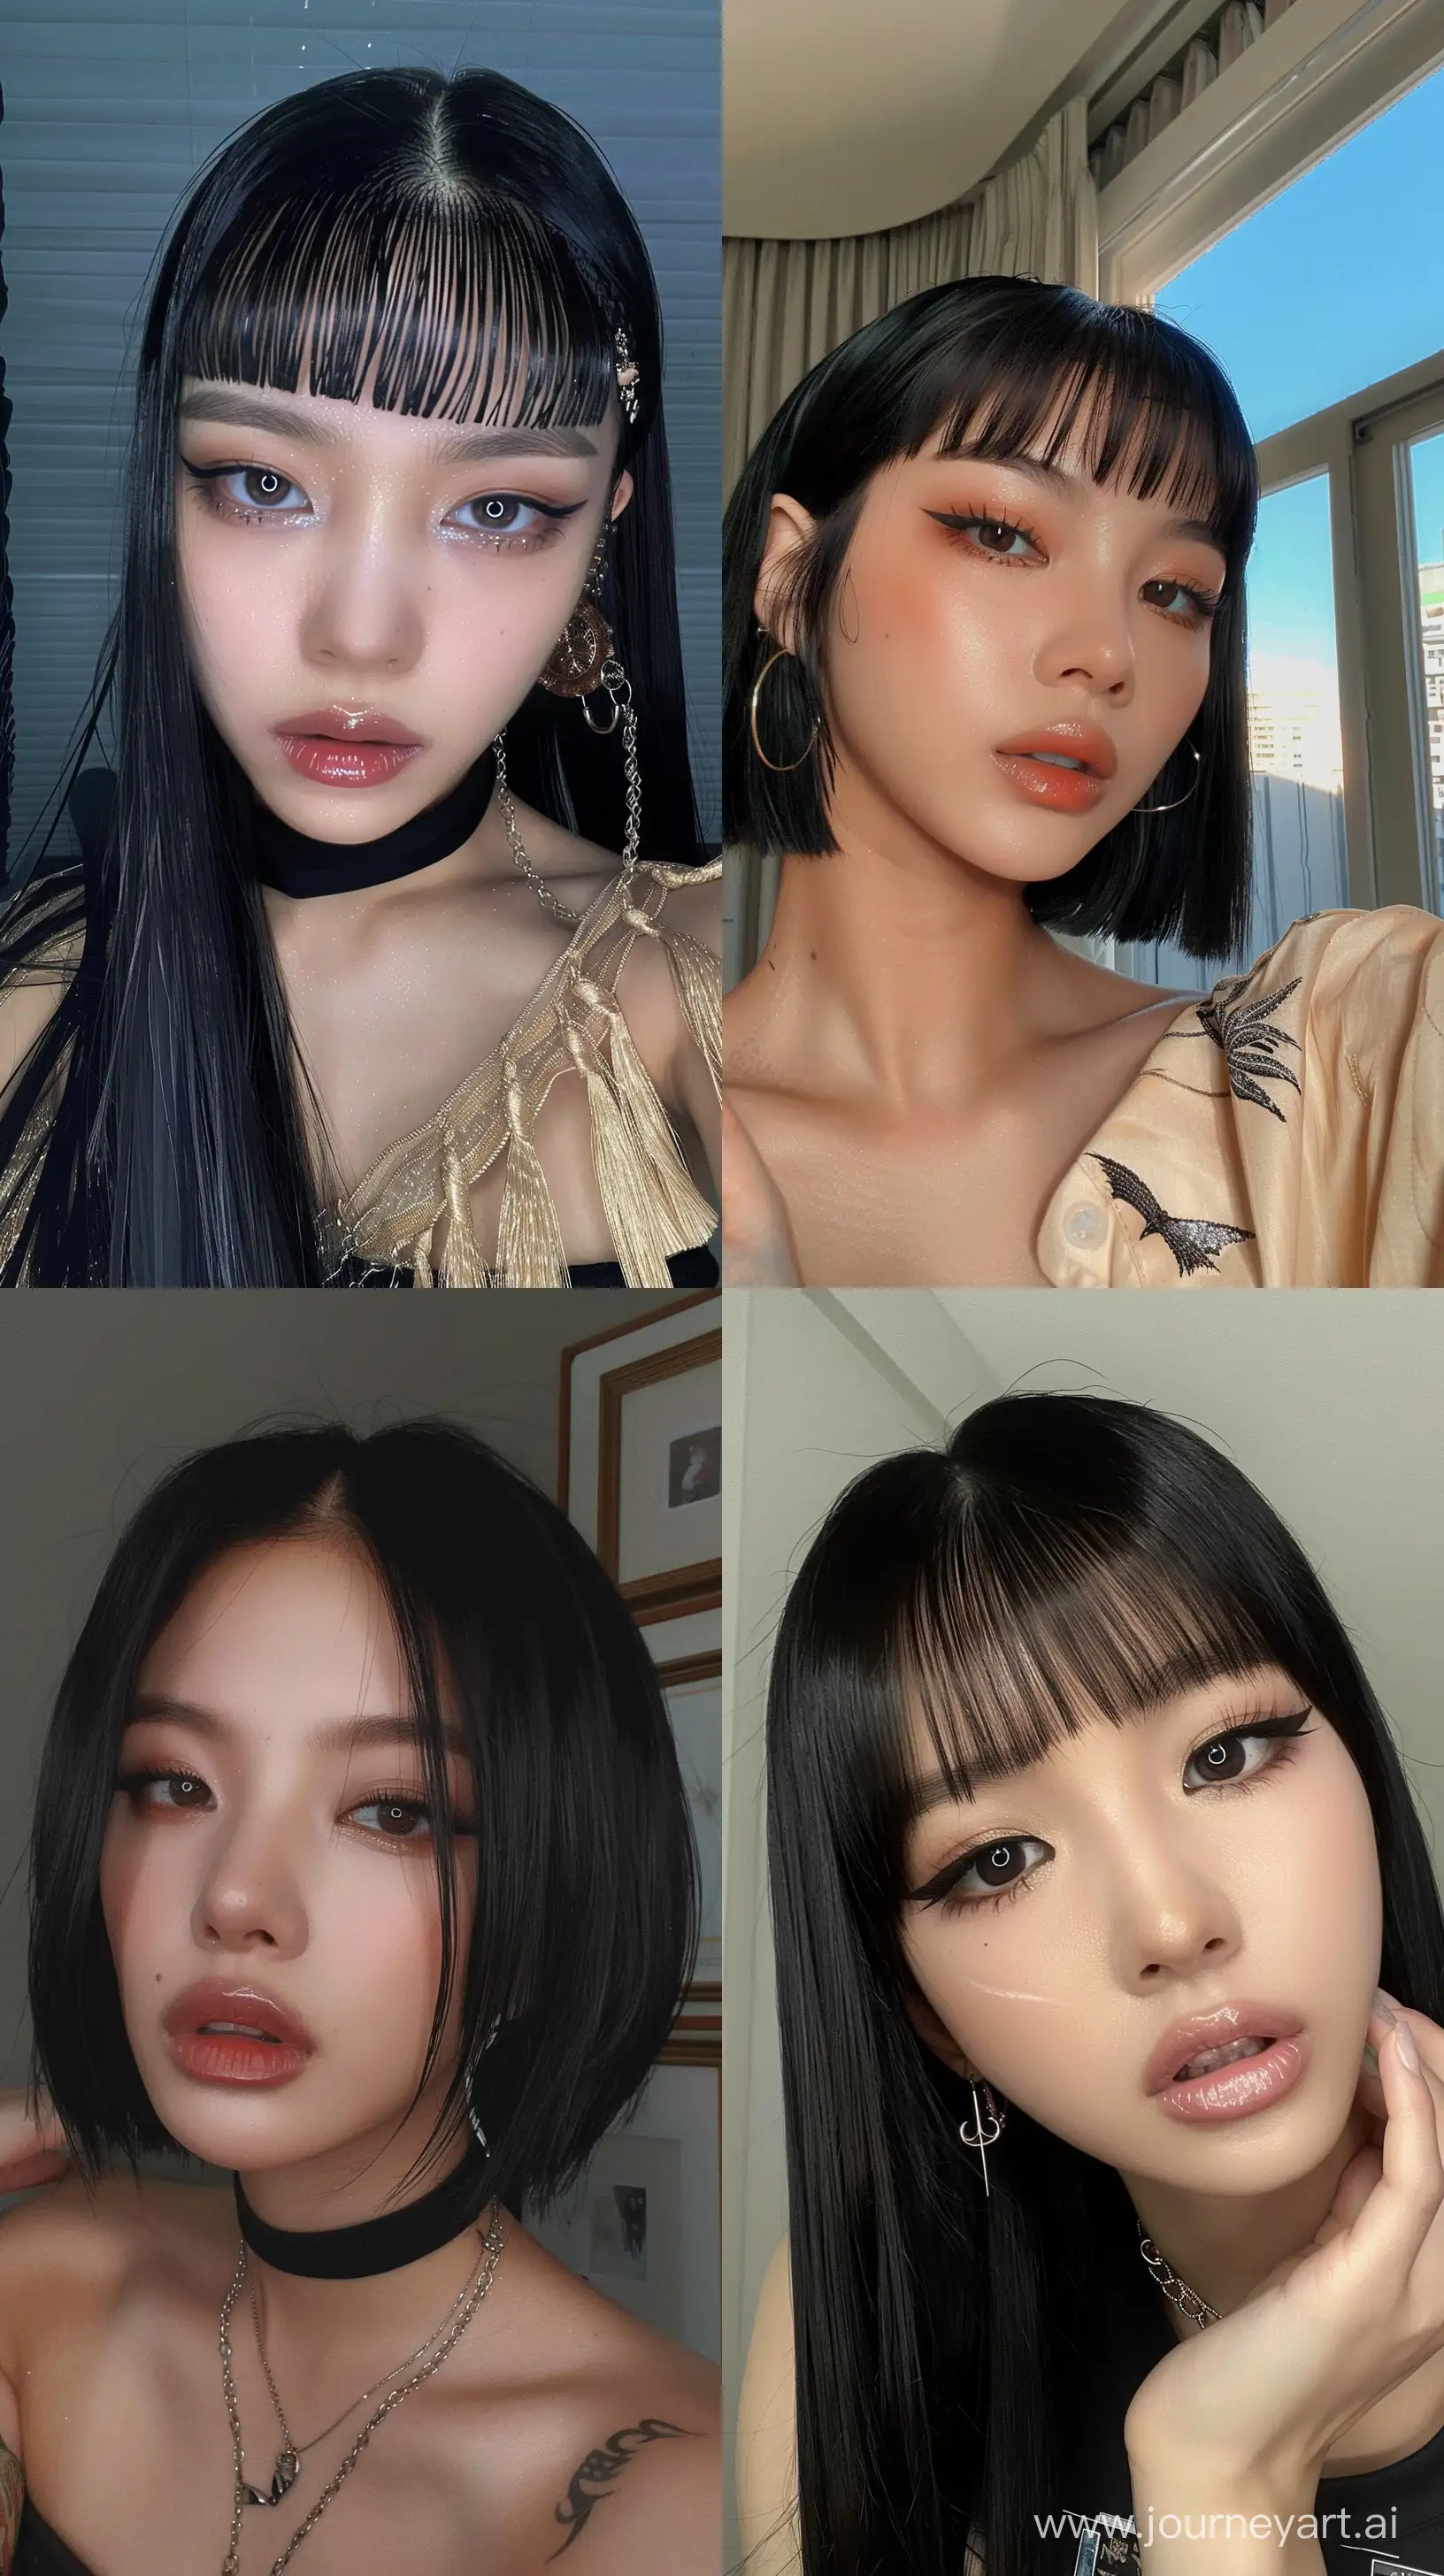 Blackpinks-Jennie-Stunning-Selfie-with-Wolfcut-Hair-and-Aesthetic-Makeup